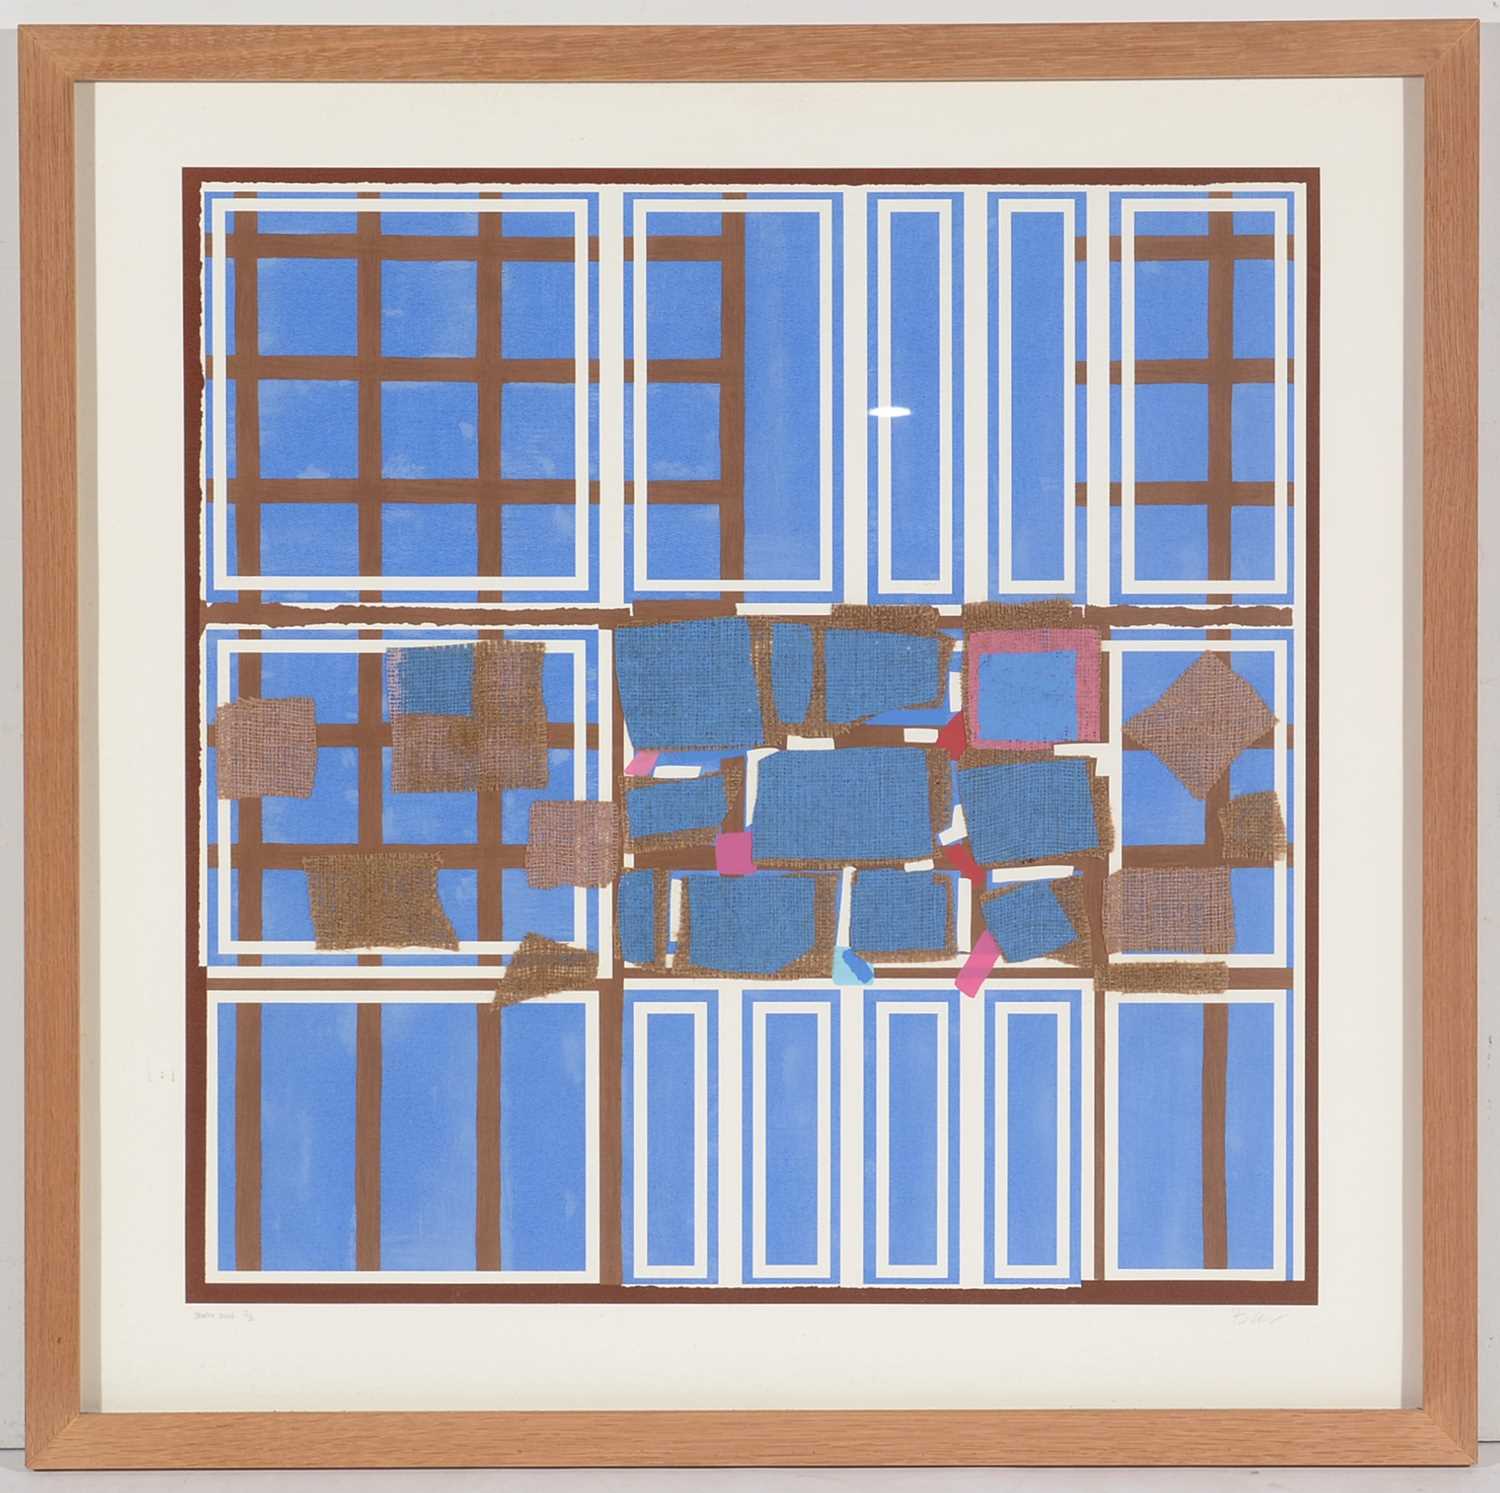 Lot 909 - Sandra Blow - silkscreen with collage elements